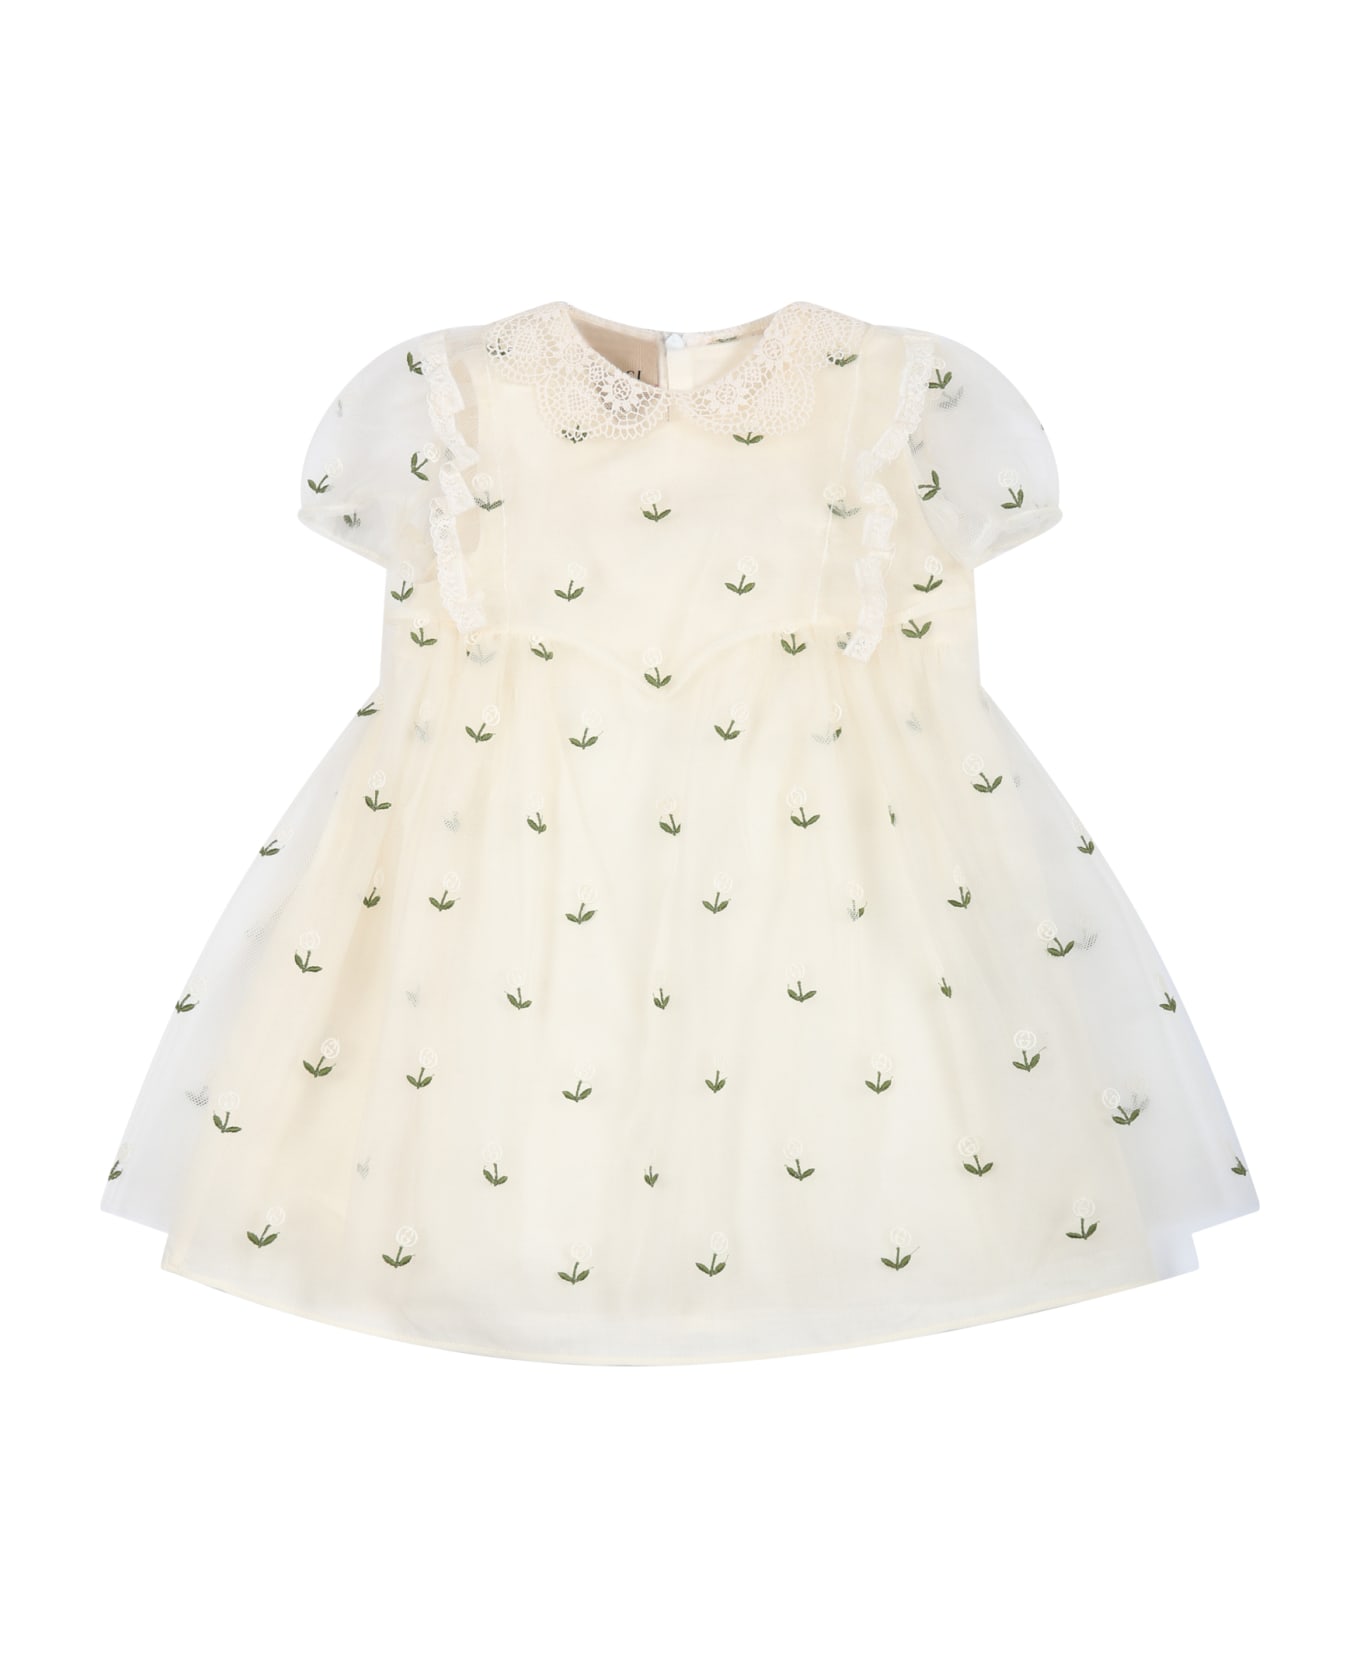 Gucci Ivory Dress For Baby Girl With All-over Embroidered Flowers And Logo Gg - Ivory